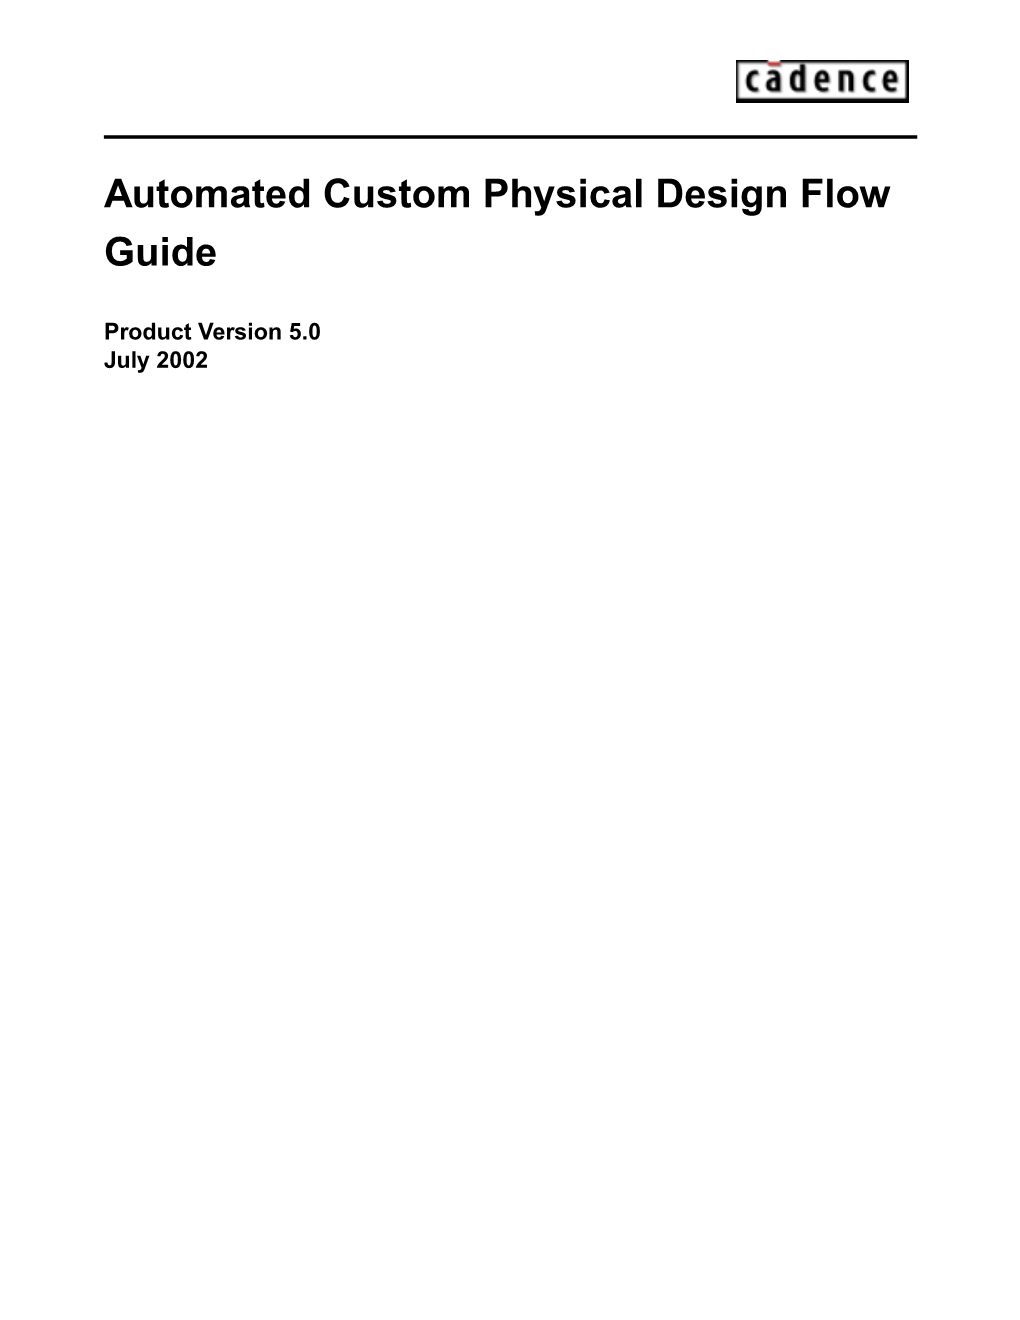 Automated Custom Physical Design Flow Guide